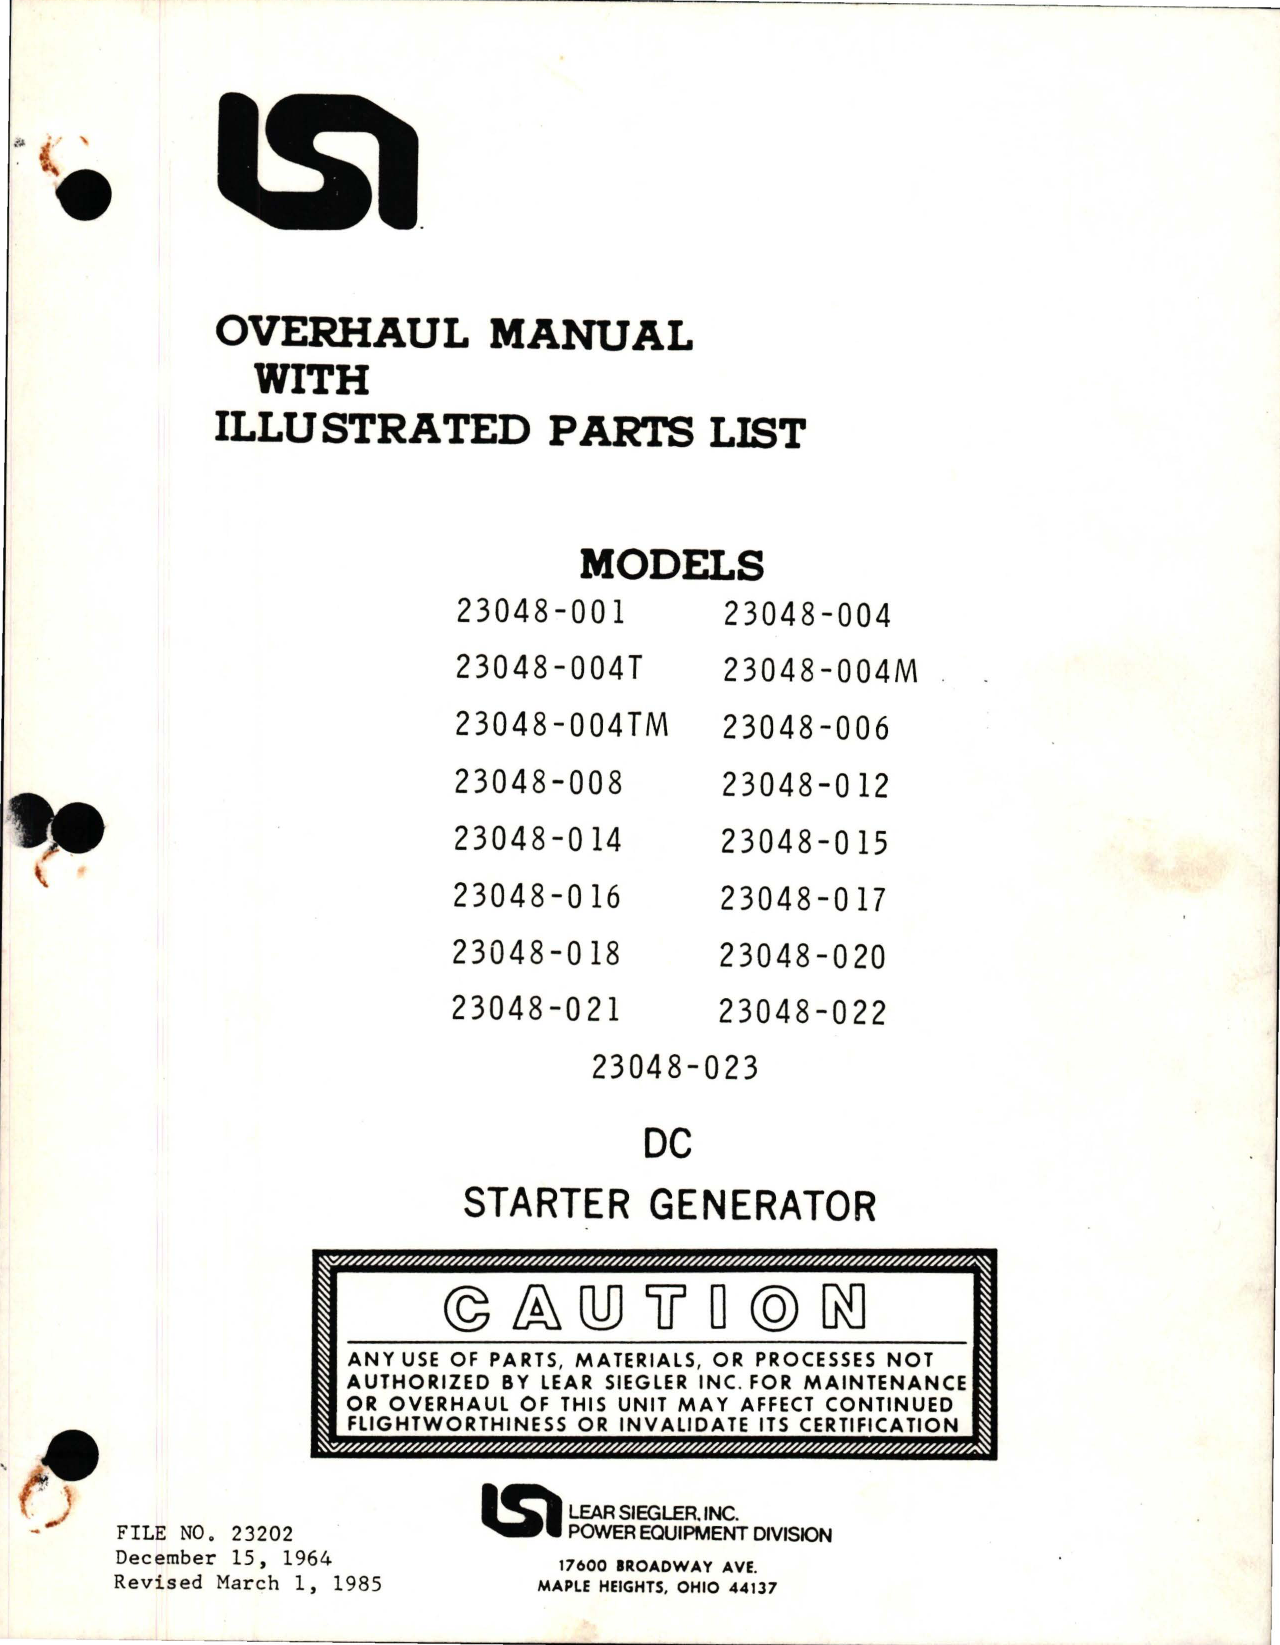 Sample page 1 from AirCorps Library document: Overhaul with Illustrated Parts List for DC Starter Generator